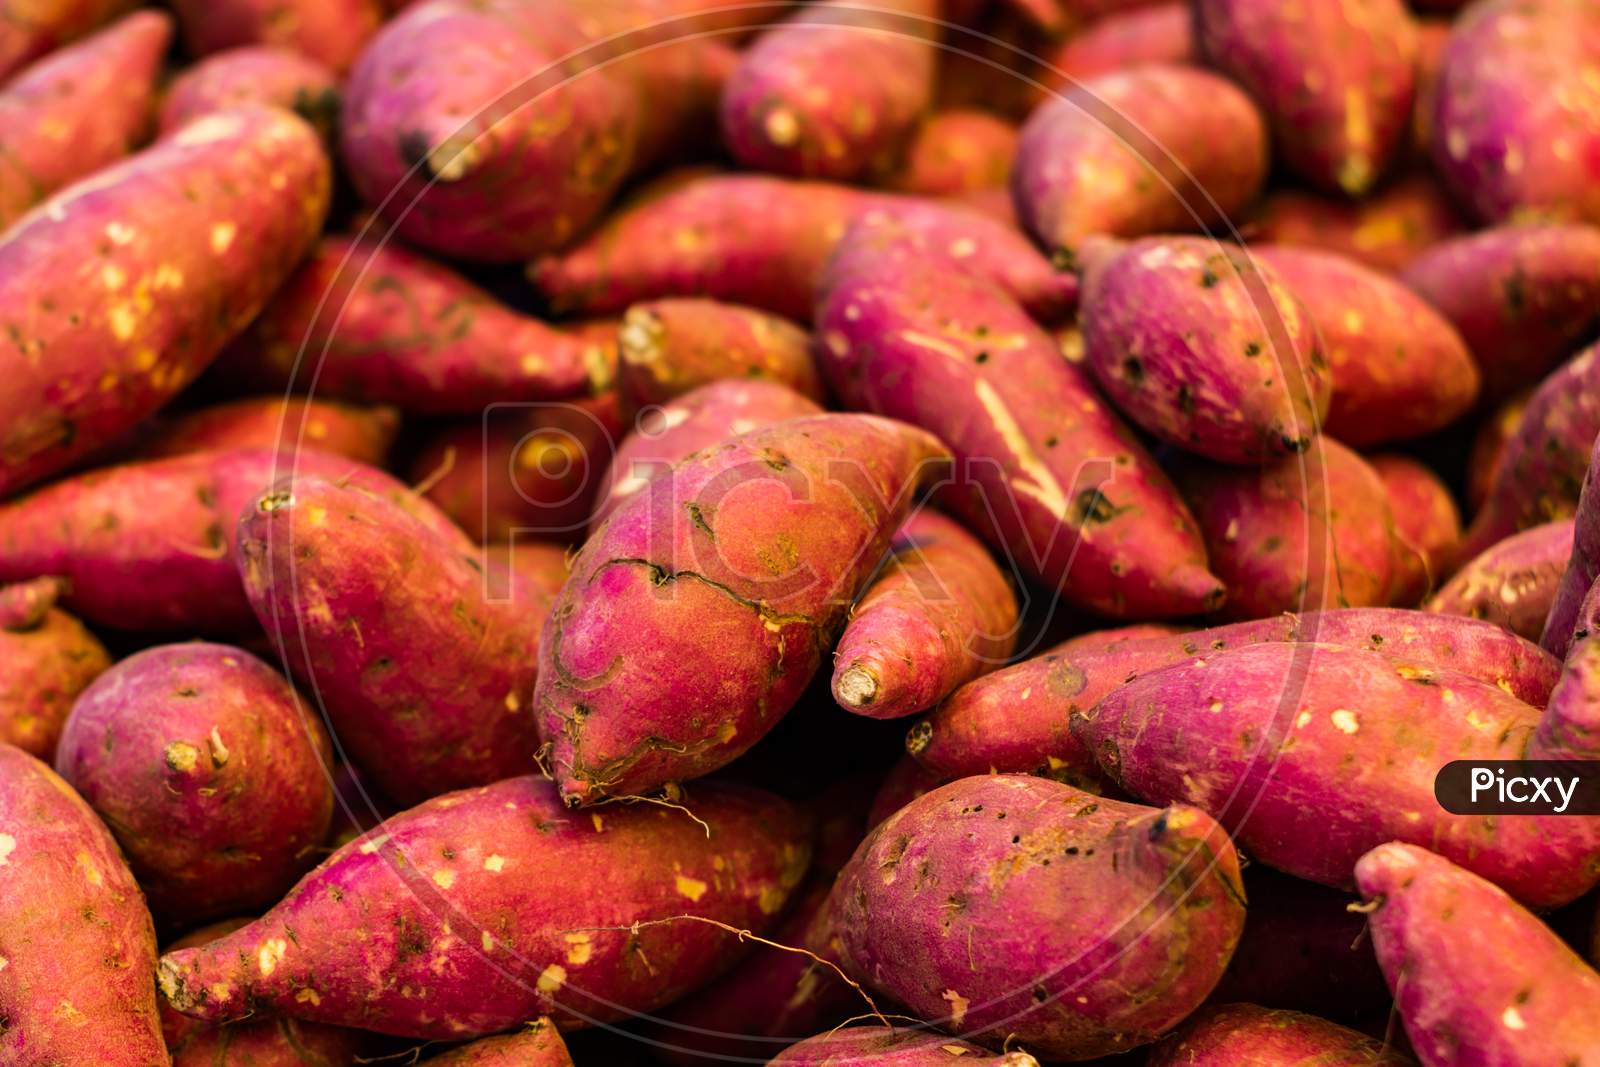 Sweet Potatoes In The Market. Numerous Tubers Of Plant Origin.